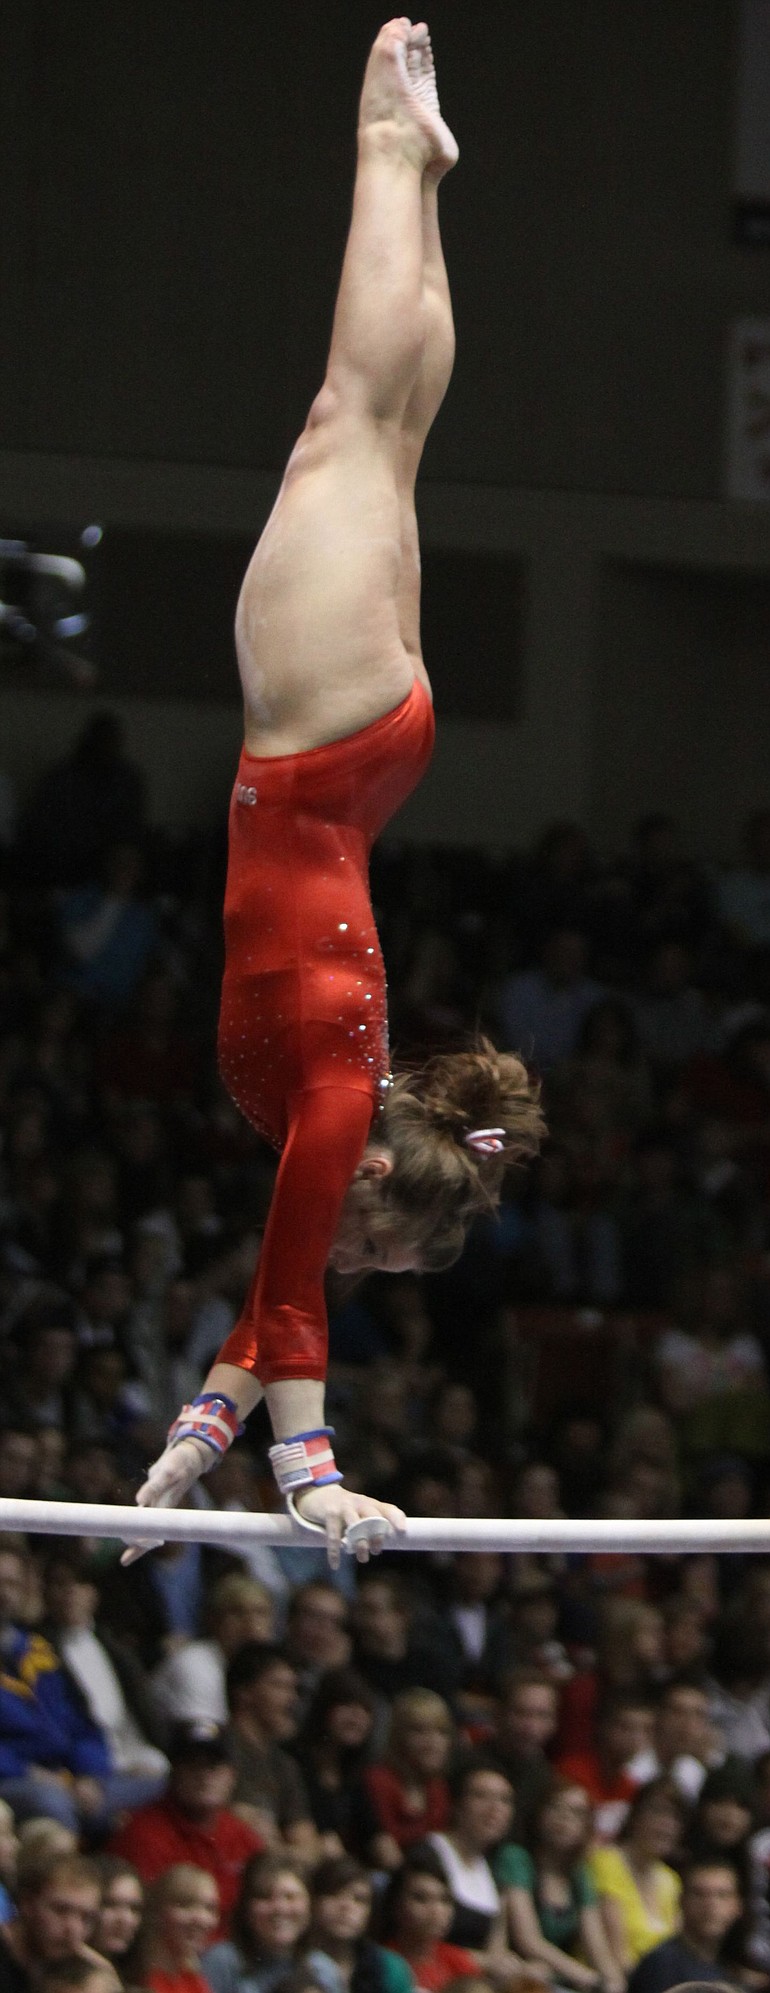 Alyssa Click loves competing on bars and for college crowds.